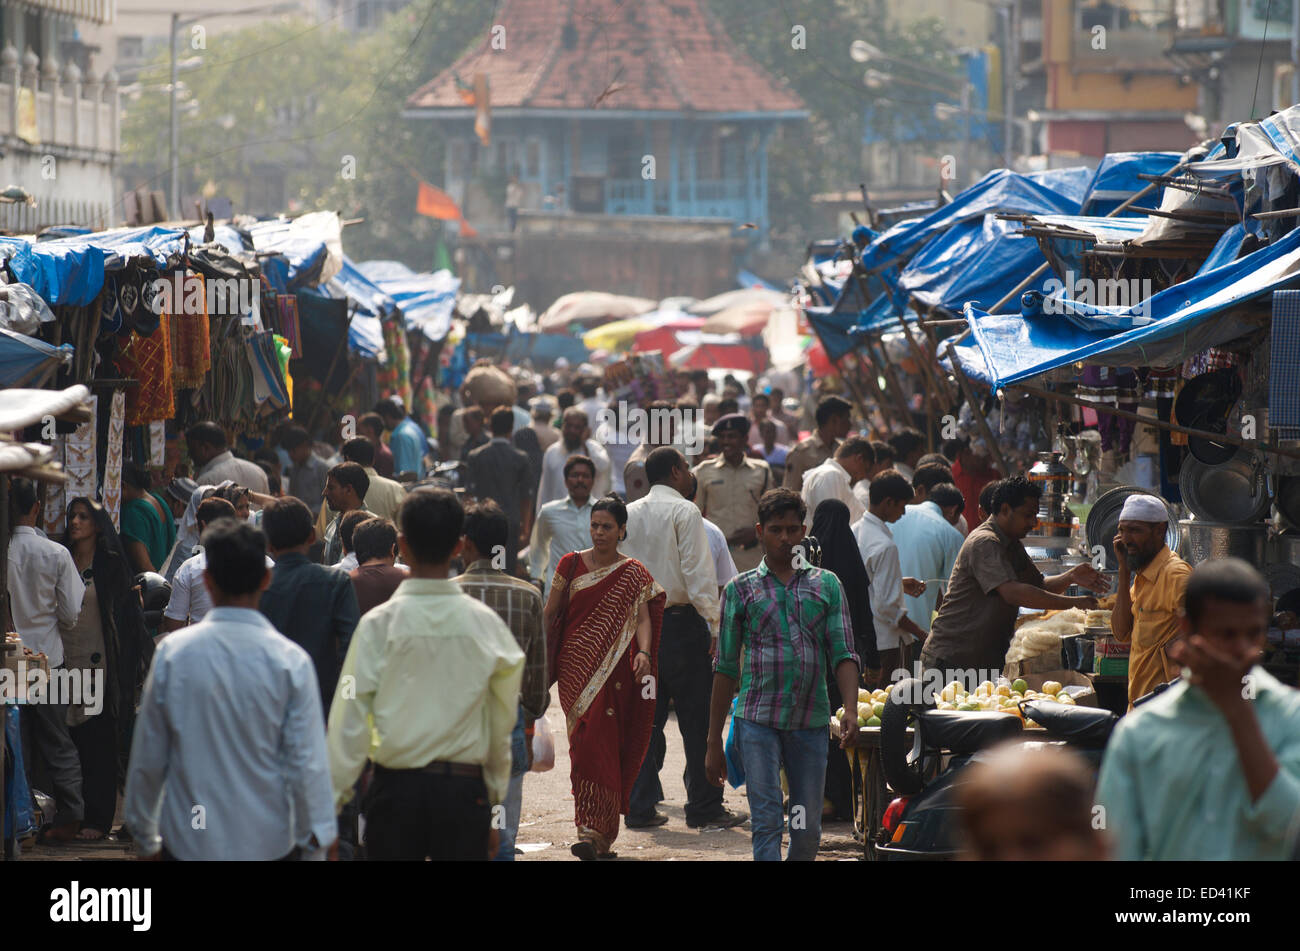 MUMBAI, INDIA - OCTOBER 26, 2012: Shoppers walk in a crowded outdoor market in the Null Bazar neighborhood in the city center. Stock Photo